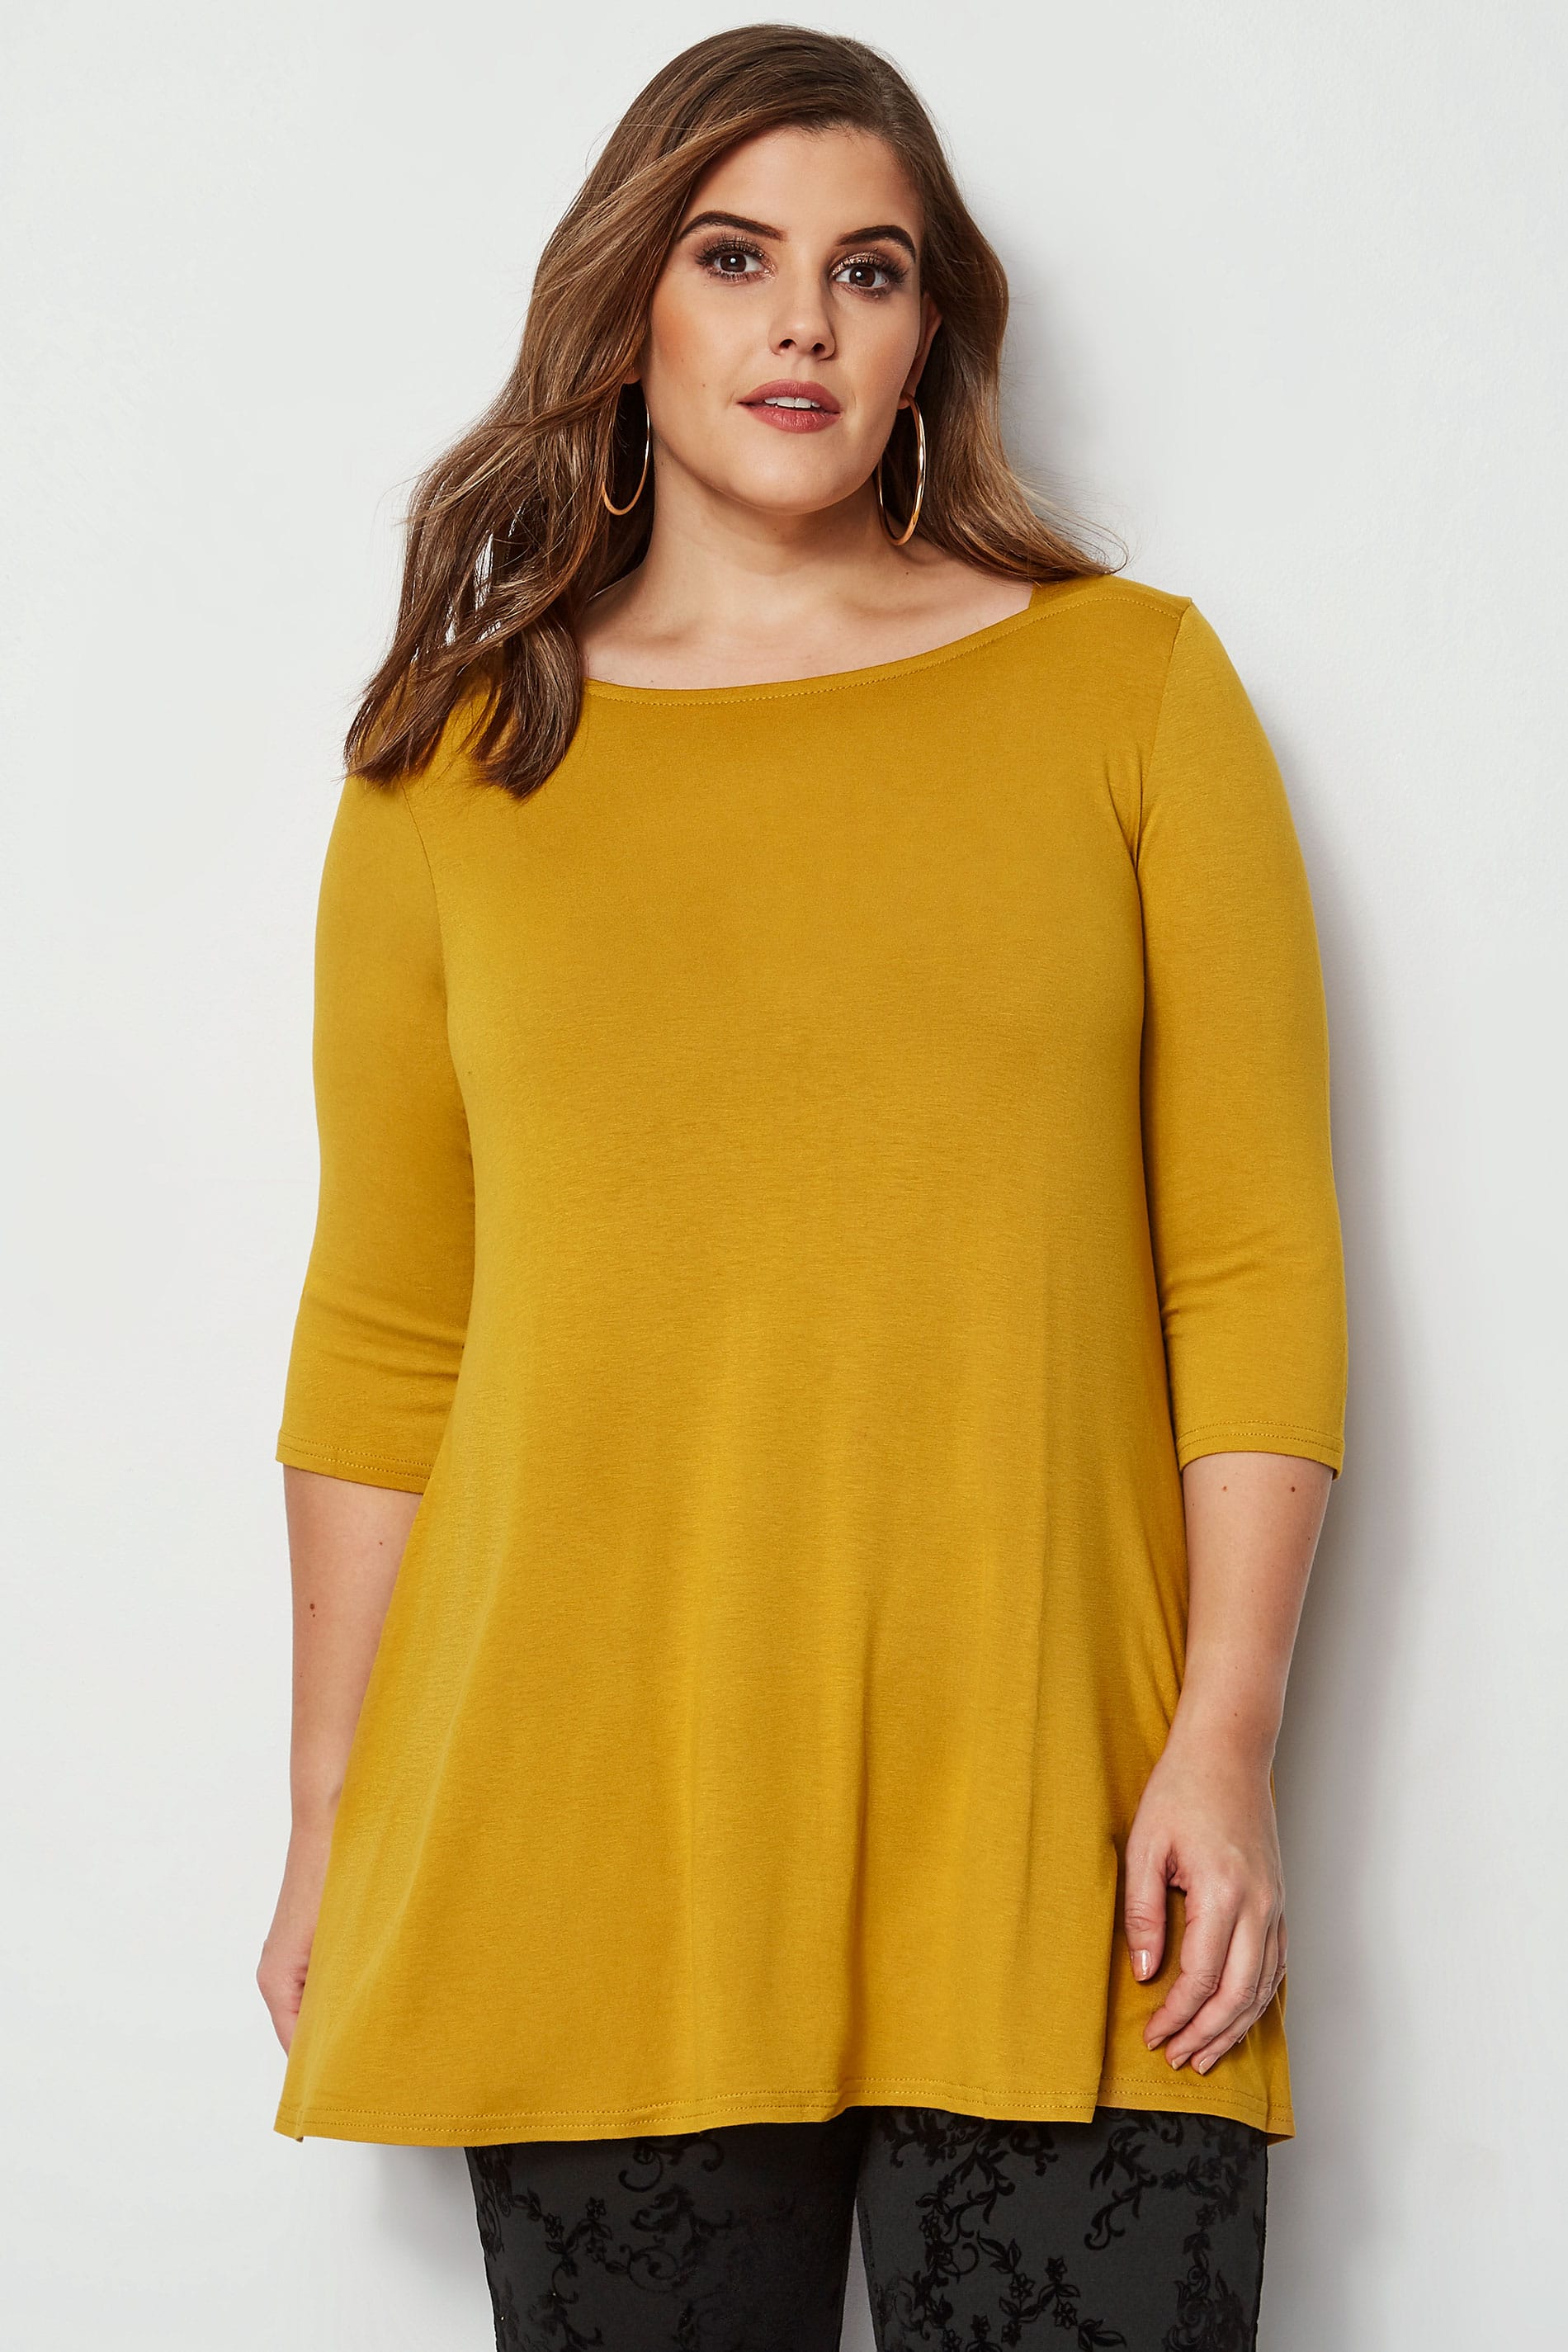 Mustard Longline Top With Envelope Neckline, Plus size 16 to 36